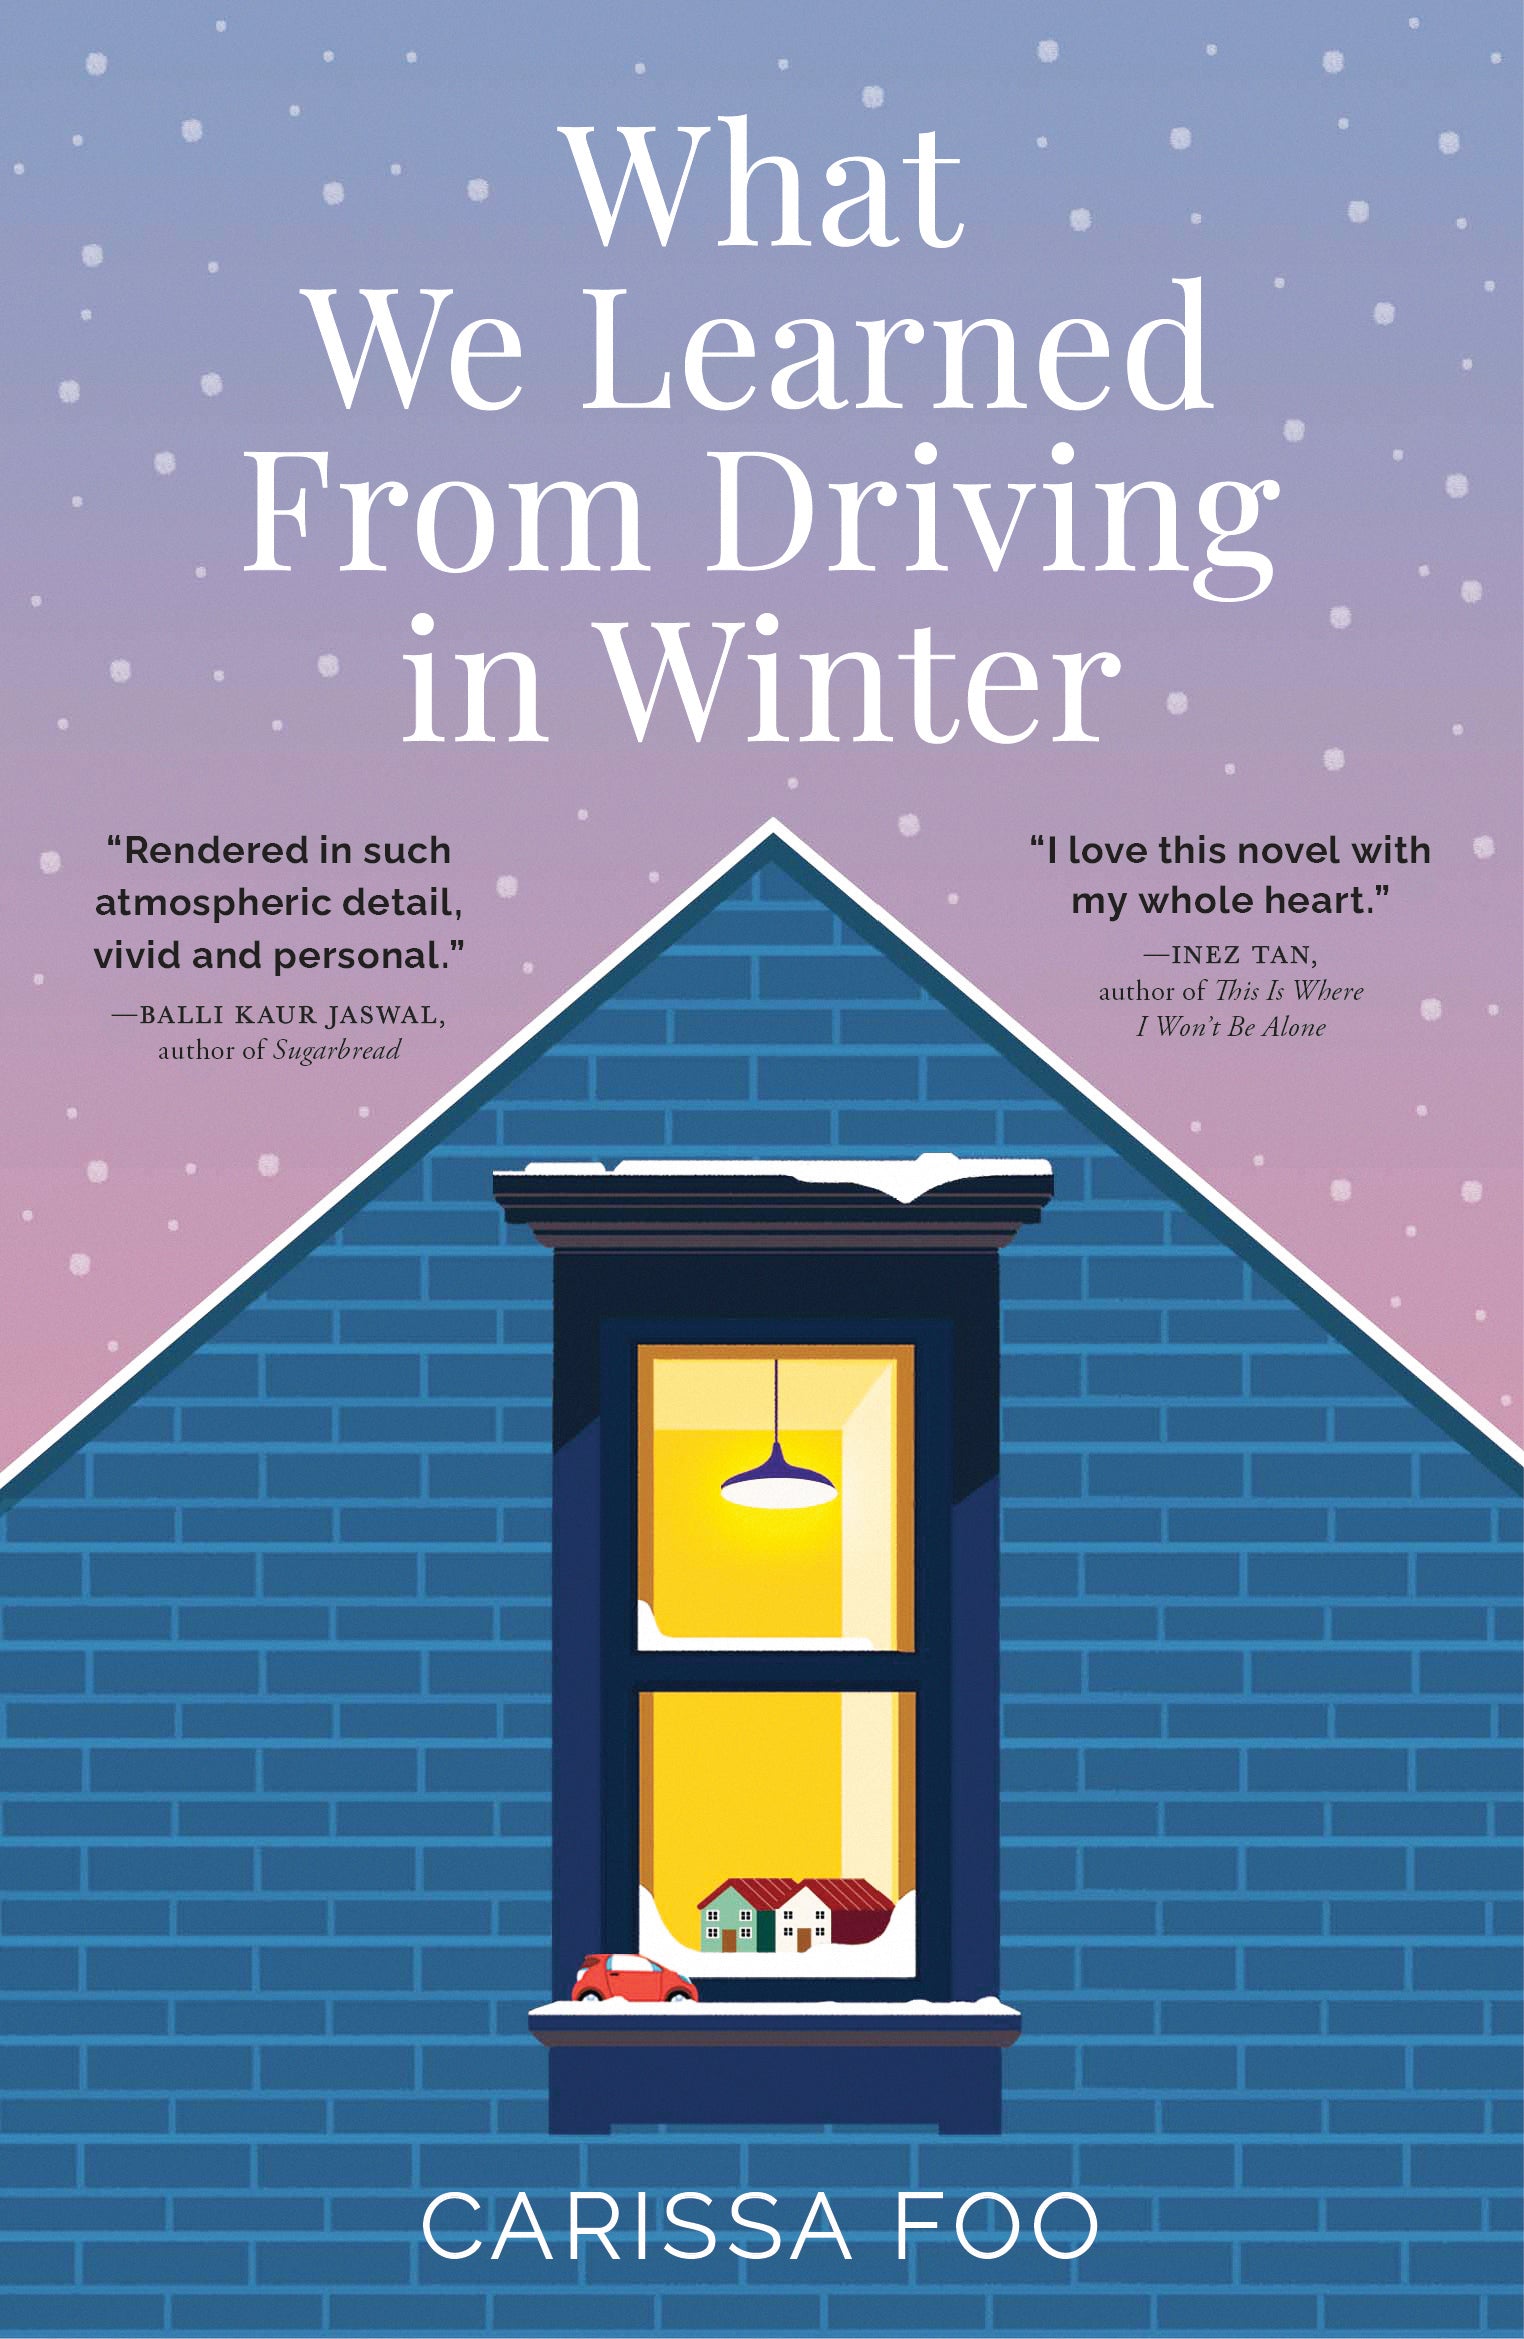 What We Learned from Driving in Winter